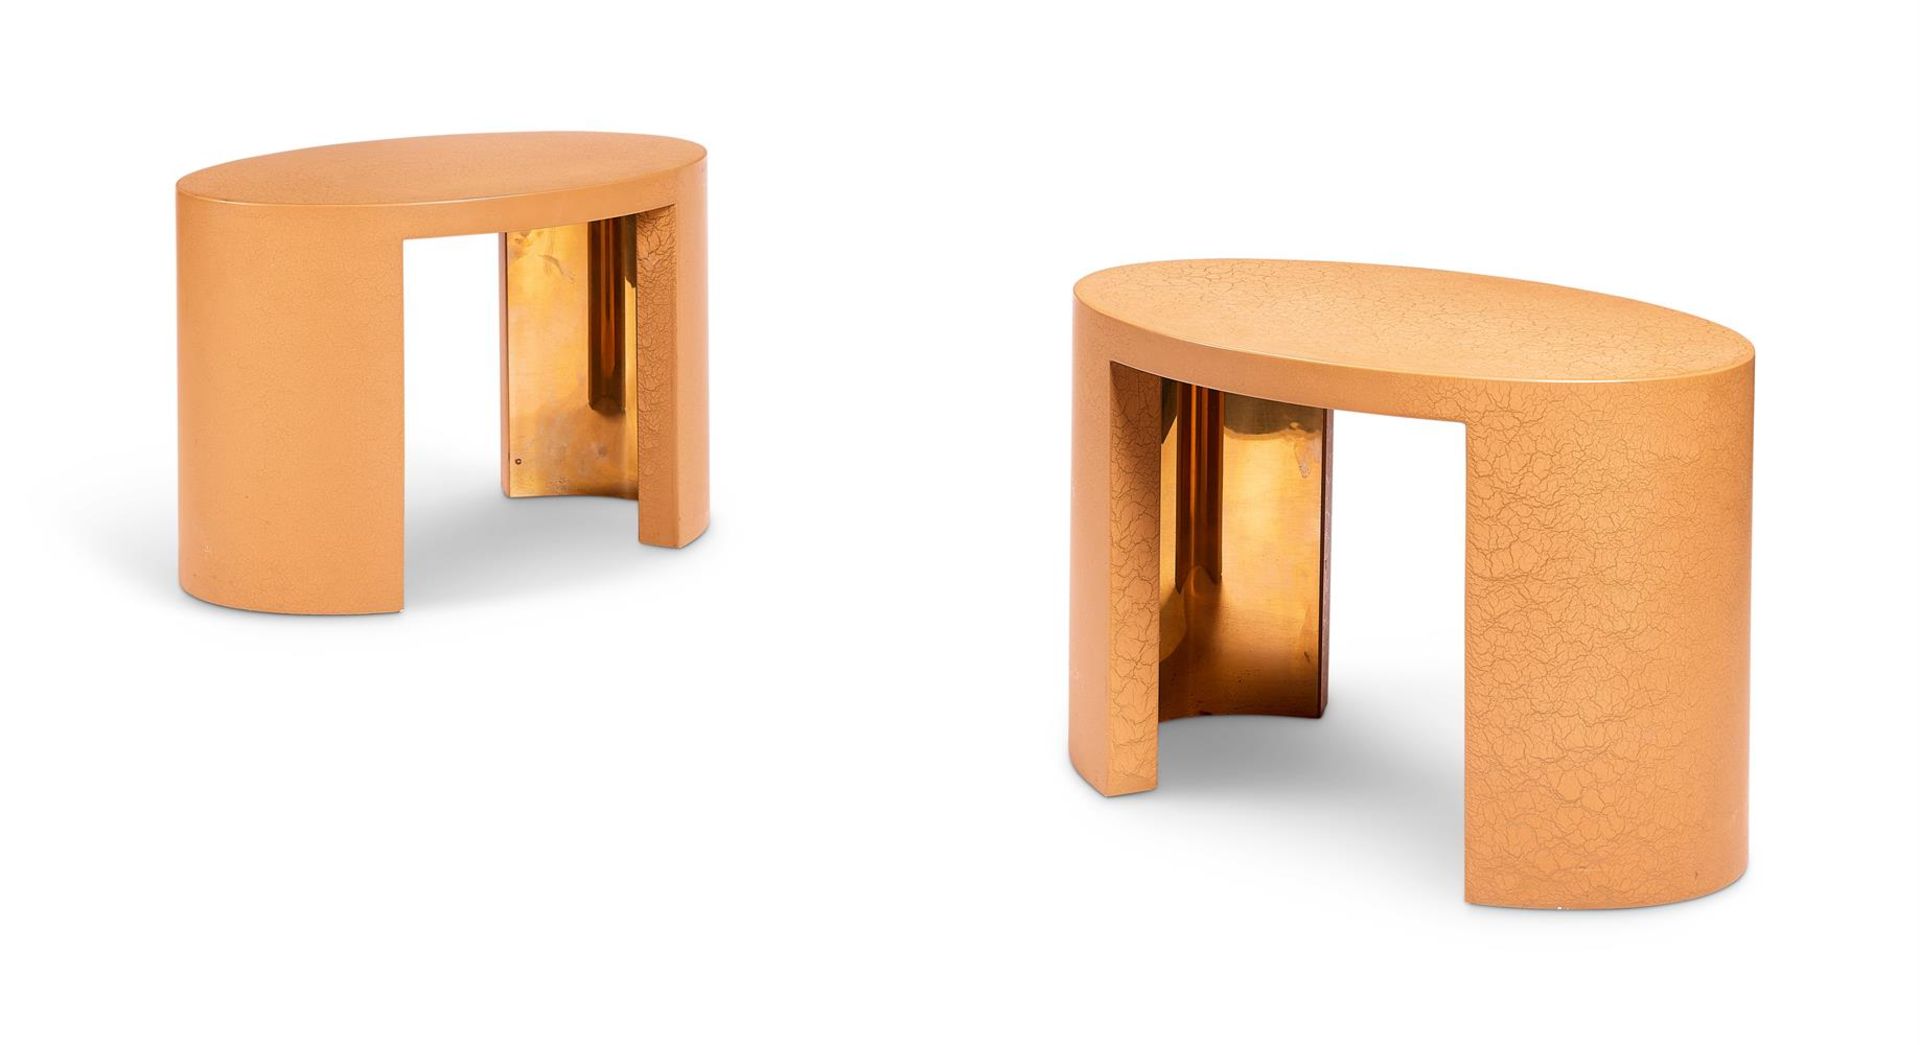 A PAIR OF YELLOW 'CRACKLE' LACQUER OCCASIONAL TABLES BY KEN BOLAN, 2018